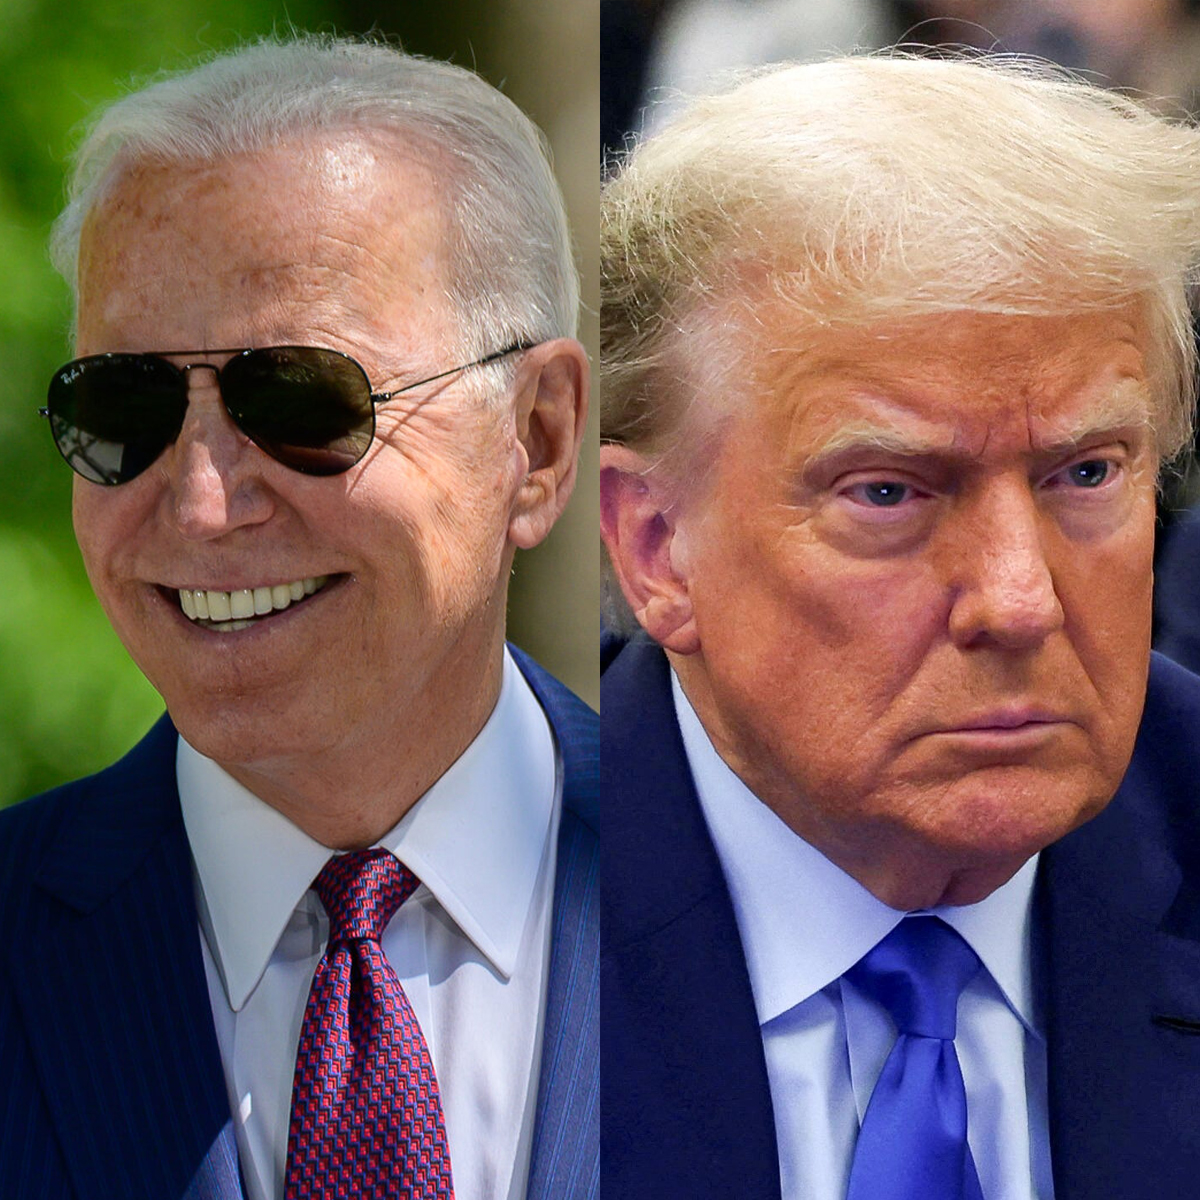 Remember folks: President Biden is on the campaign TRAIL. Donald trump is in the criminal TRIAL. BIG difference, in every way.